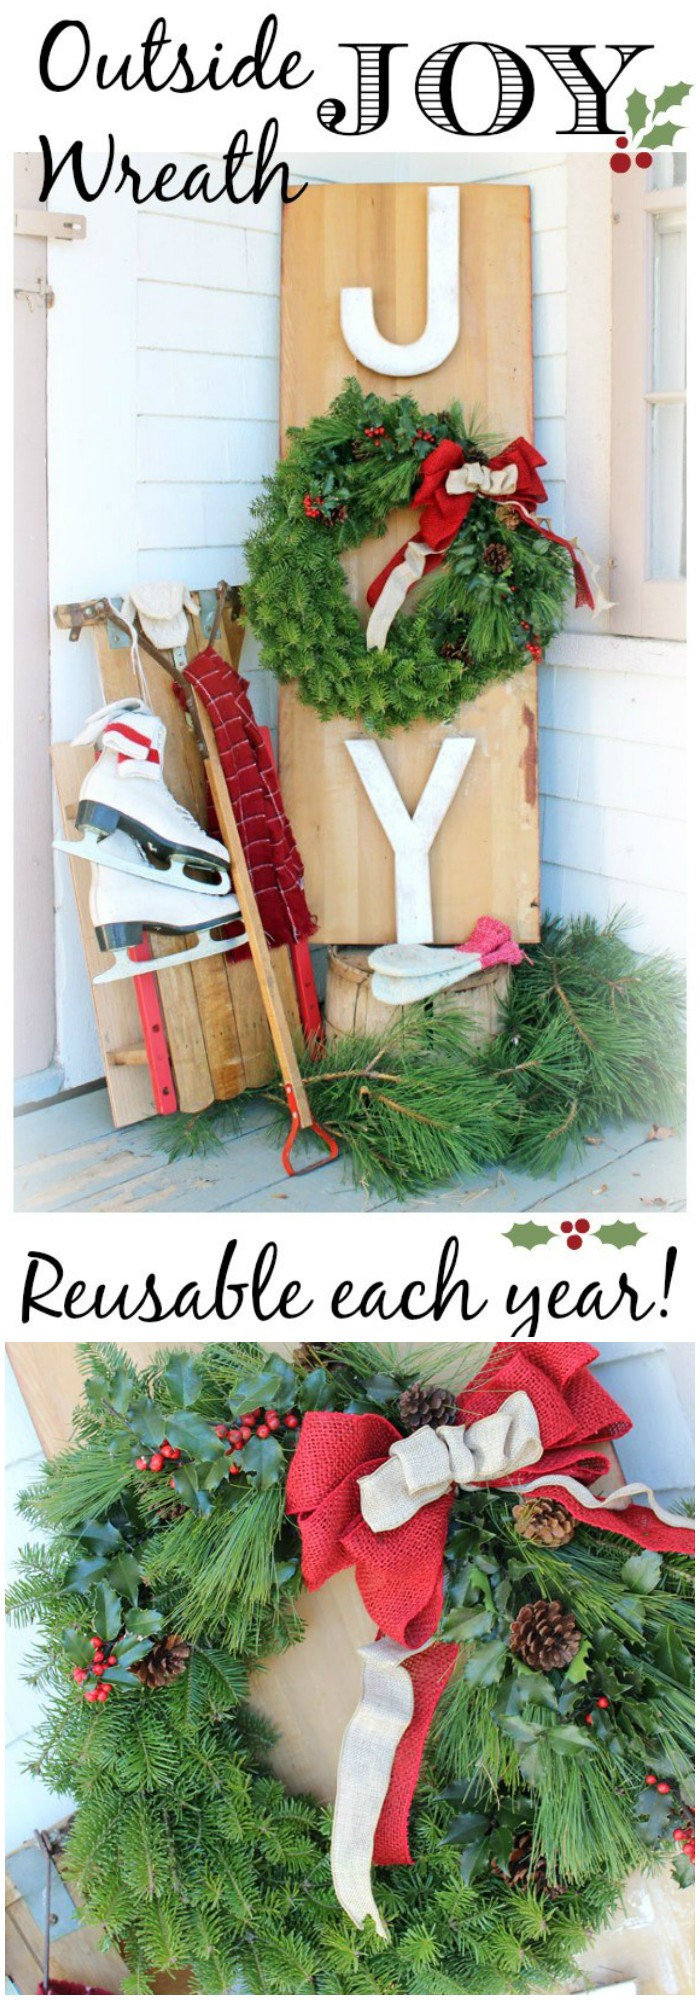 Best Outdoor Christmas Decorations
 21 Cheap DIY Outdoor Christmas Decorations • DIY Home Decor